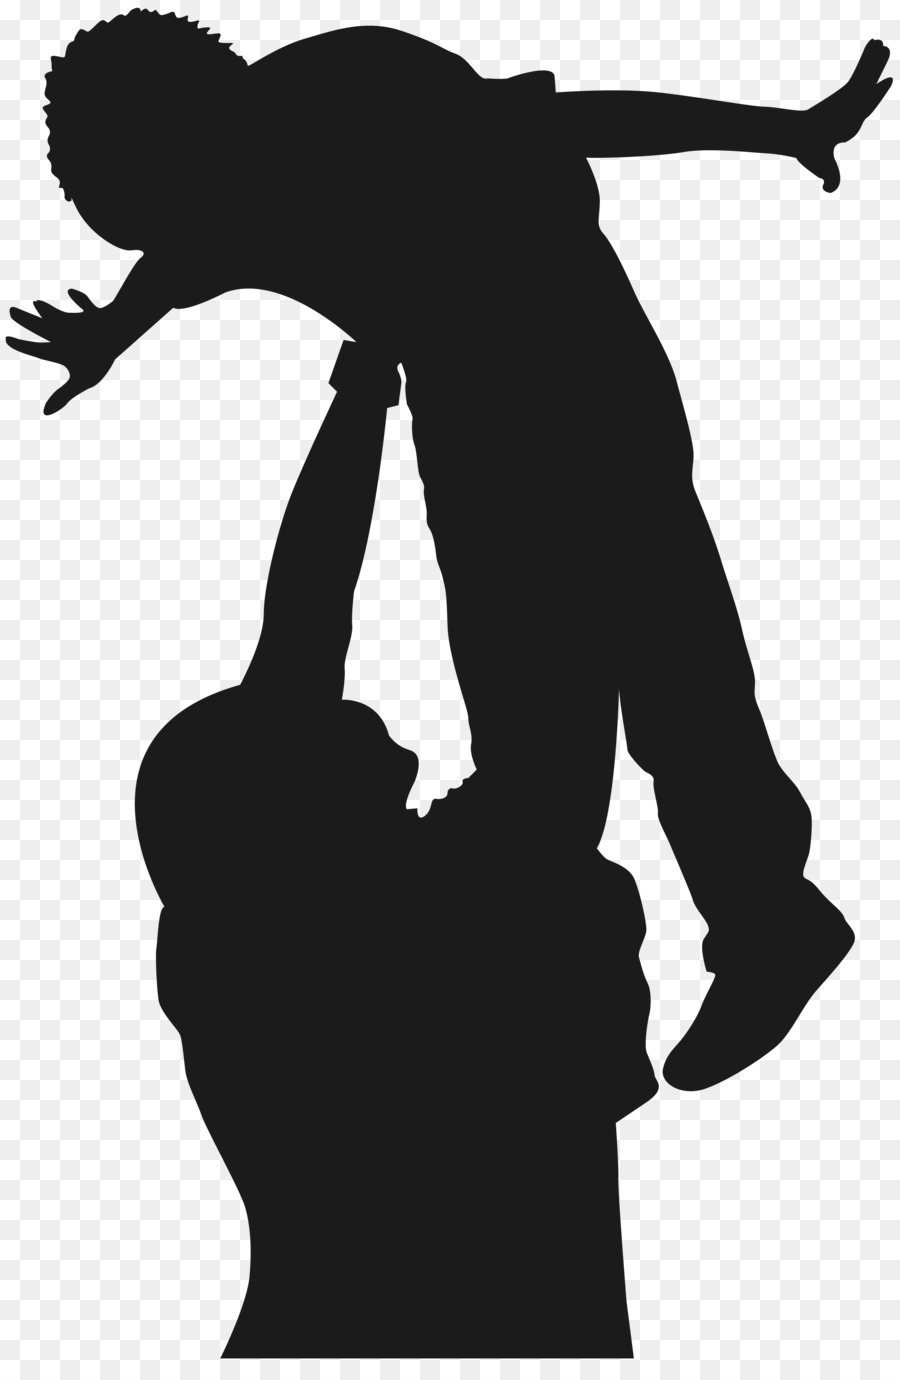 Silhouette Father - Fathers Day png download - 2537*3840 - Free Transparent Silhouette png Download.